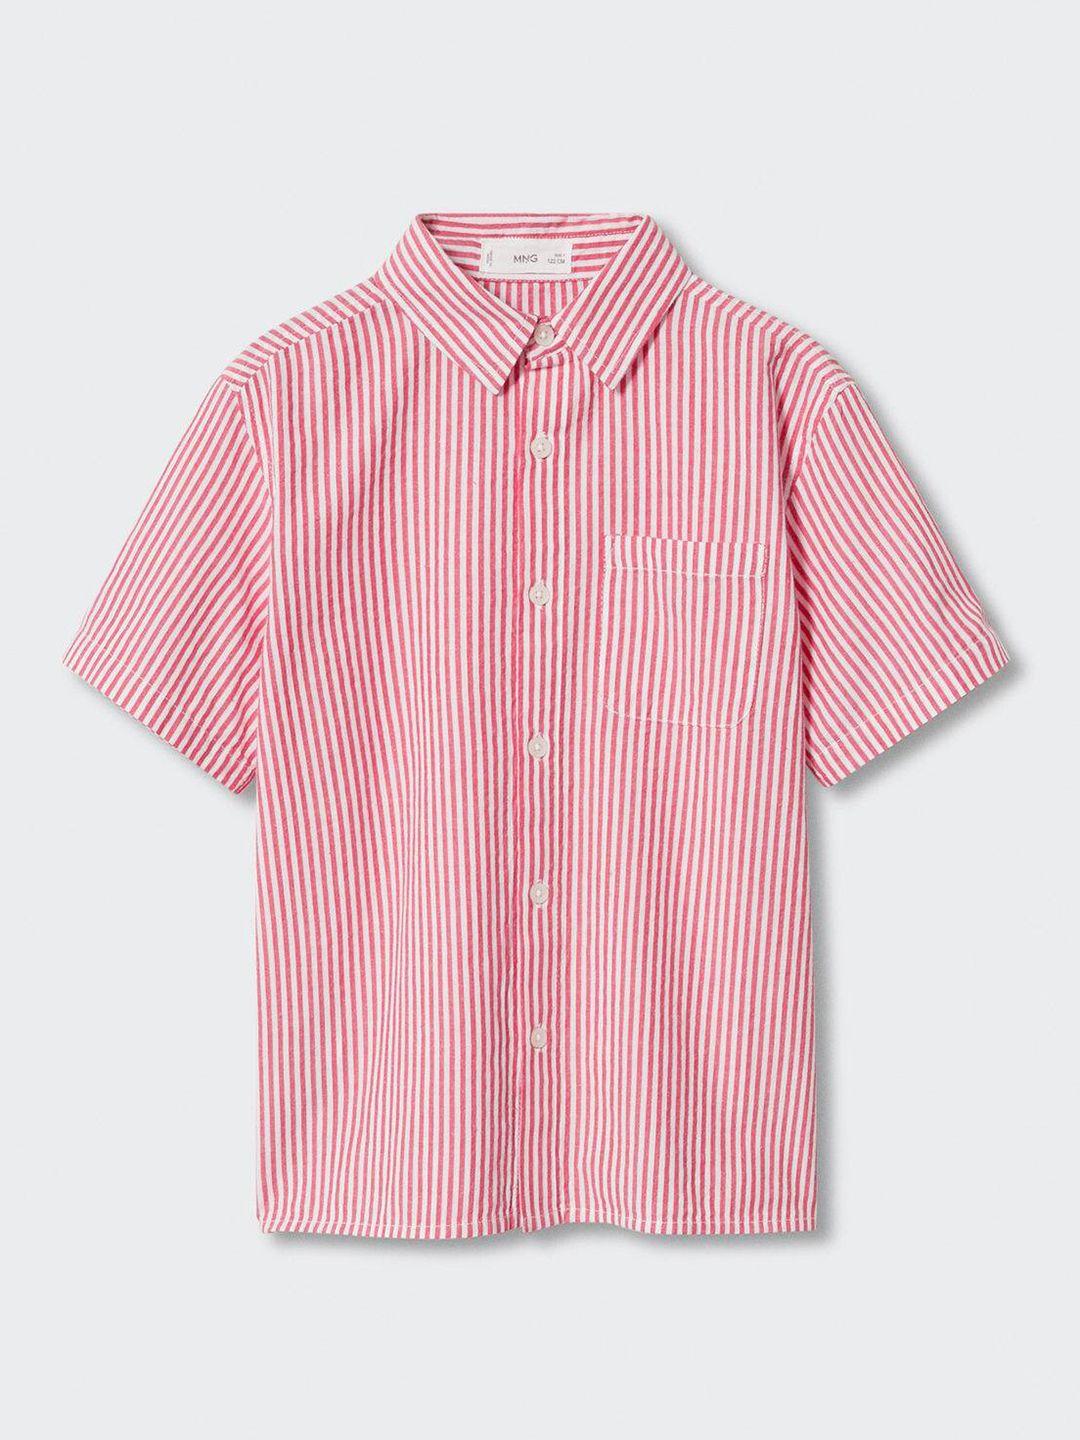 mango kids boys striped sustainable pure cotton casual shirt